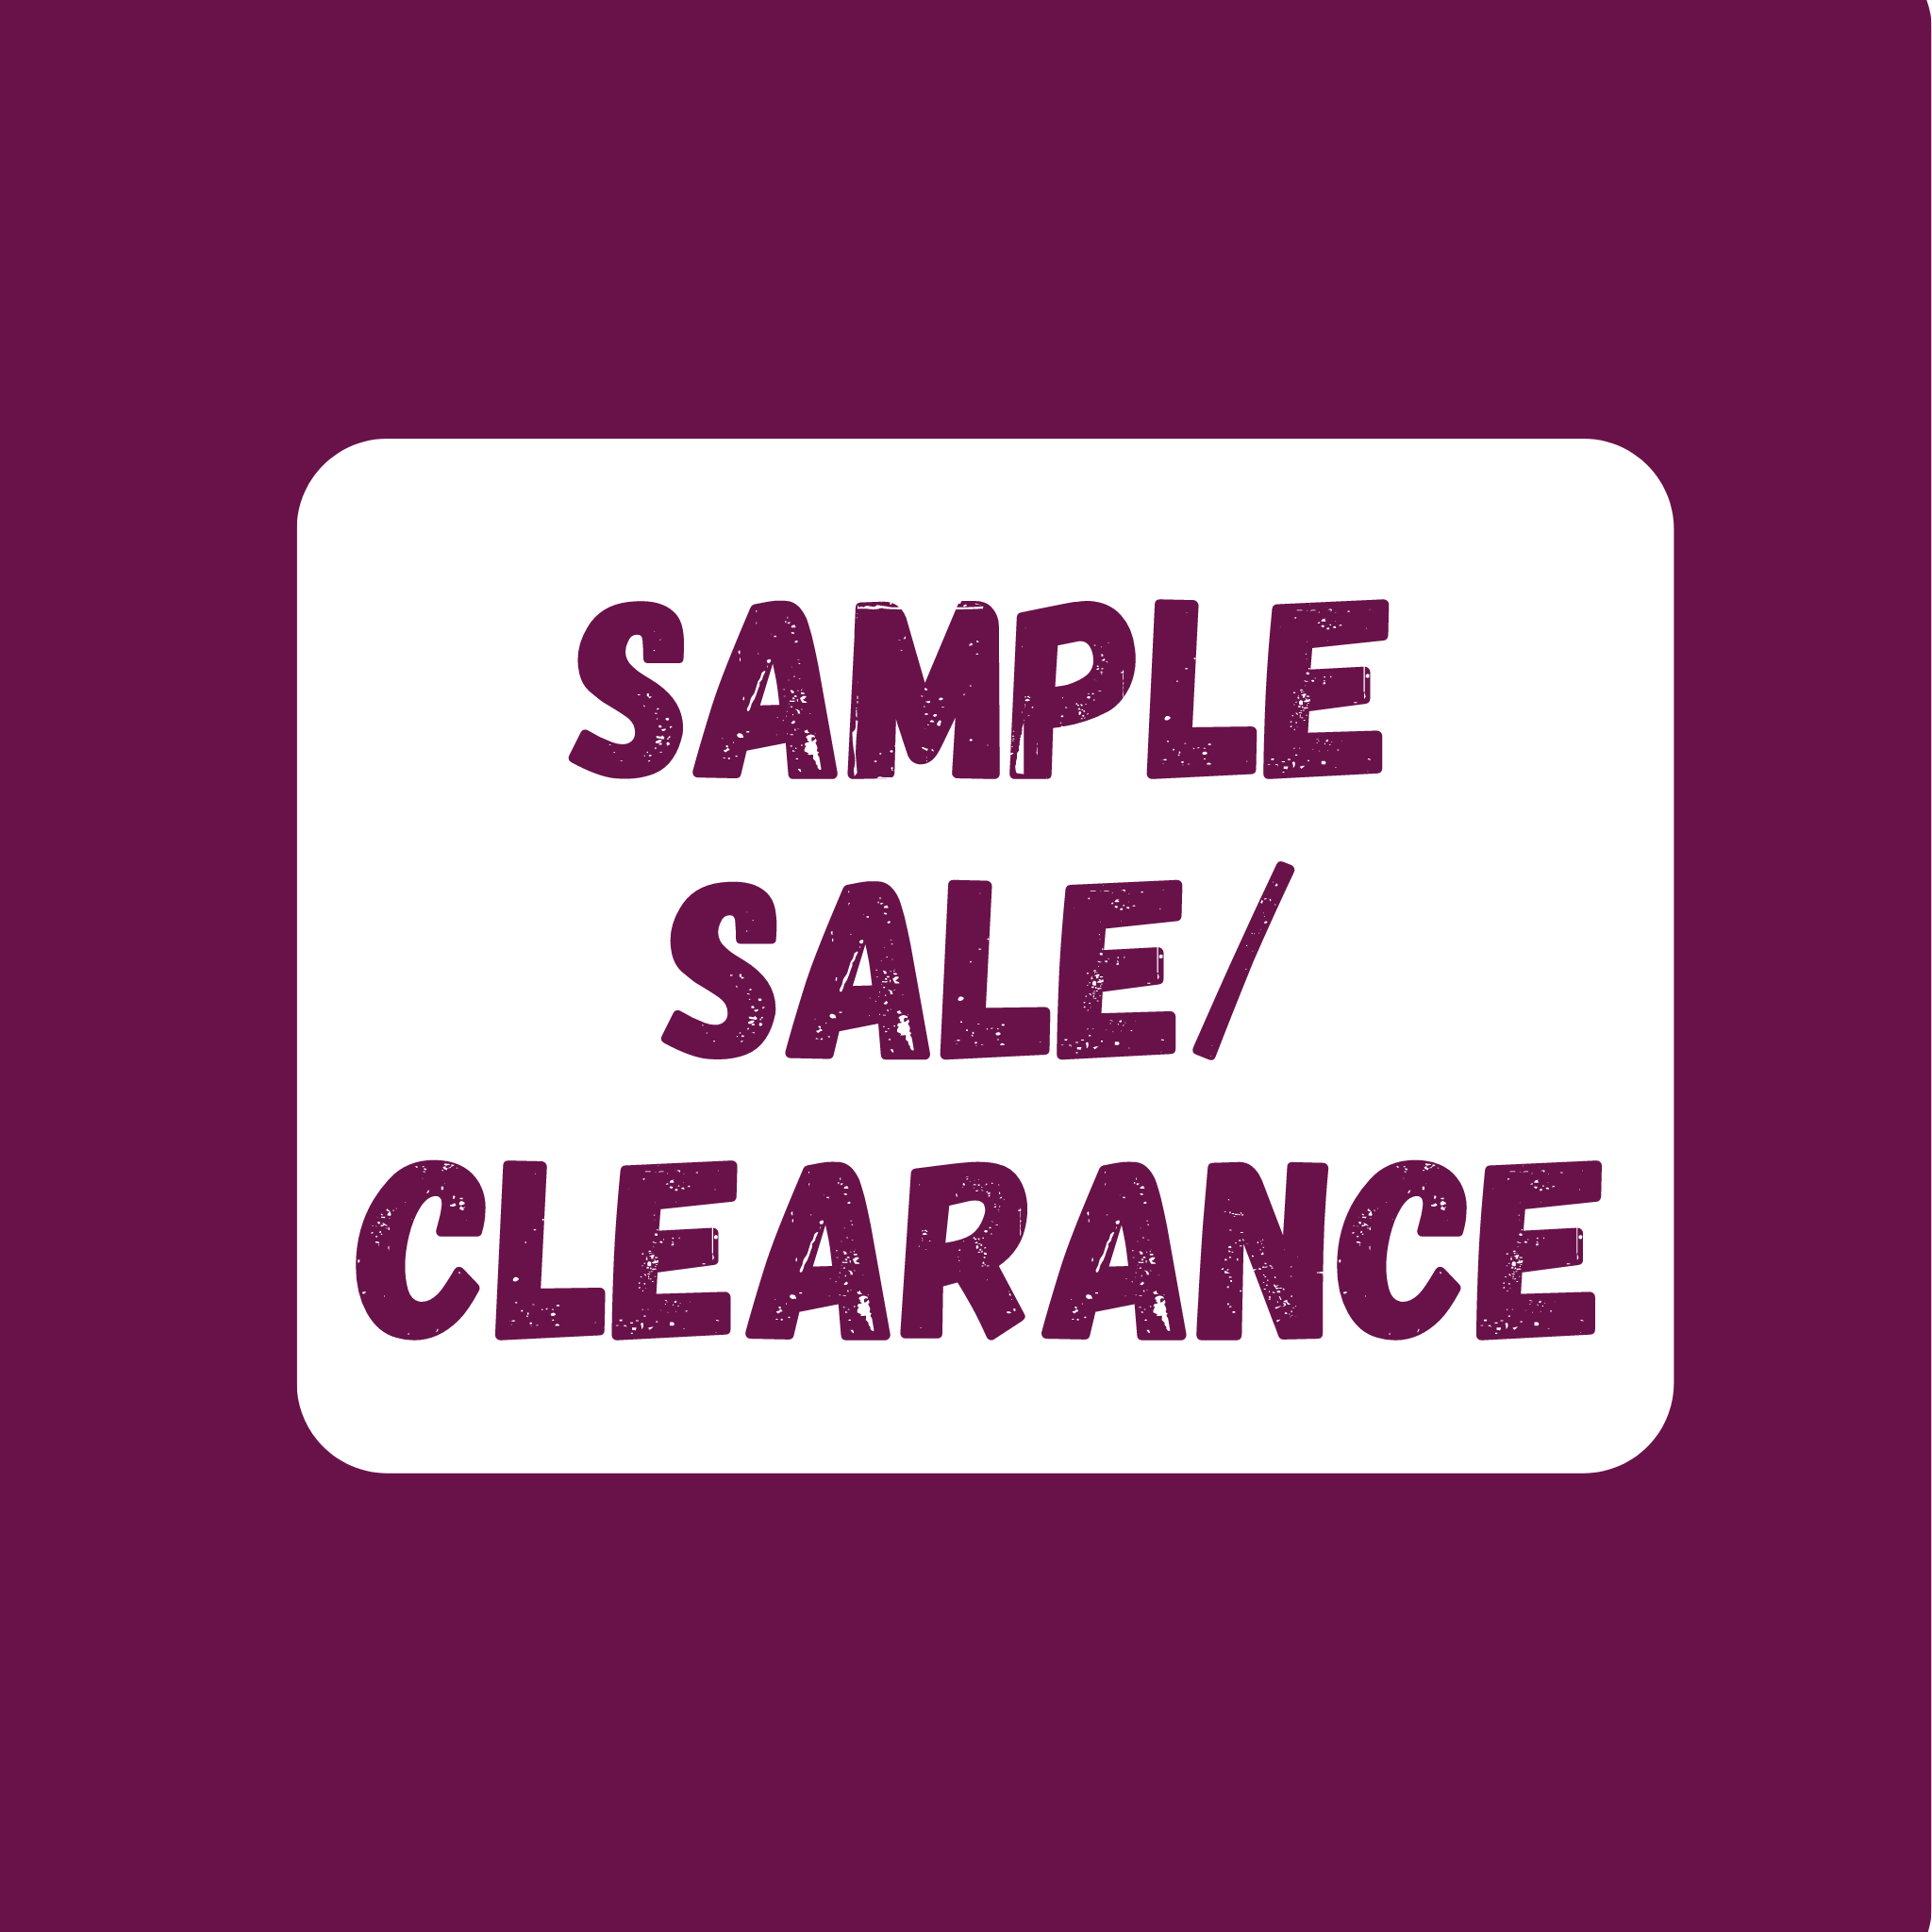 Online sample clearance sales